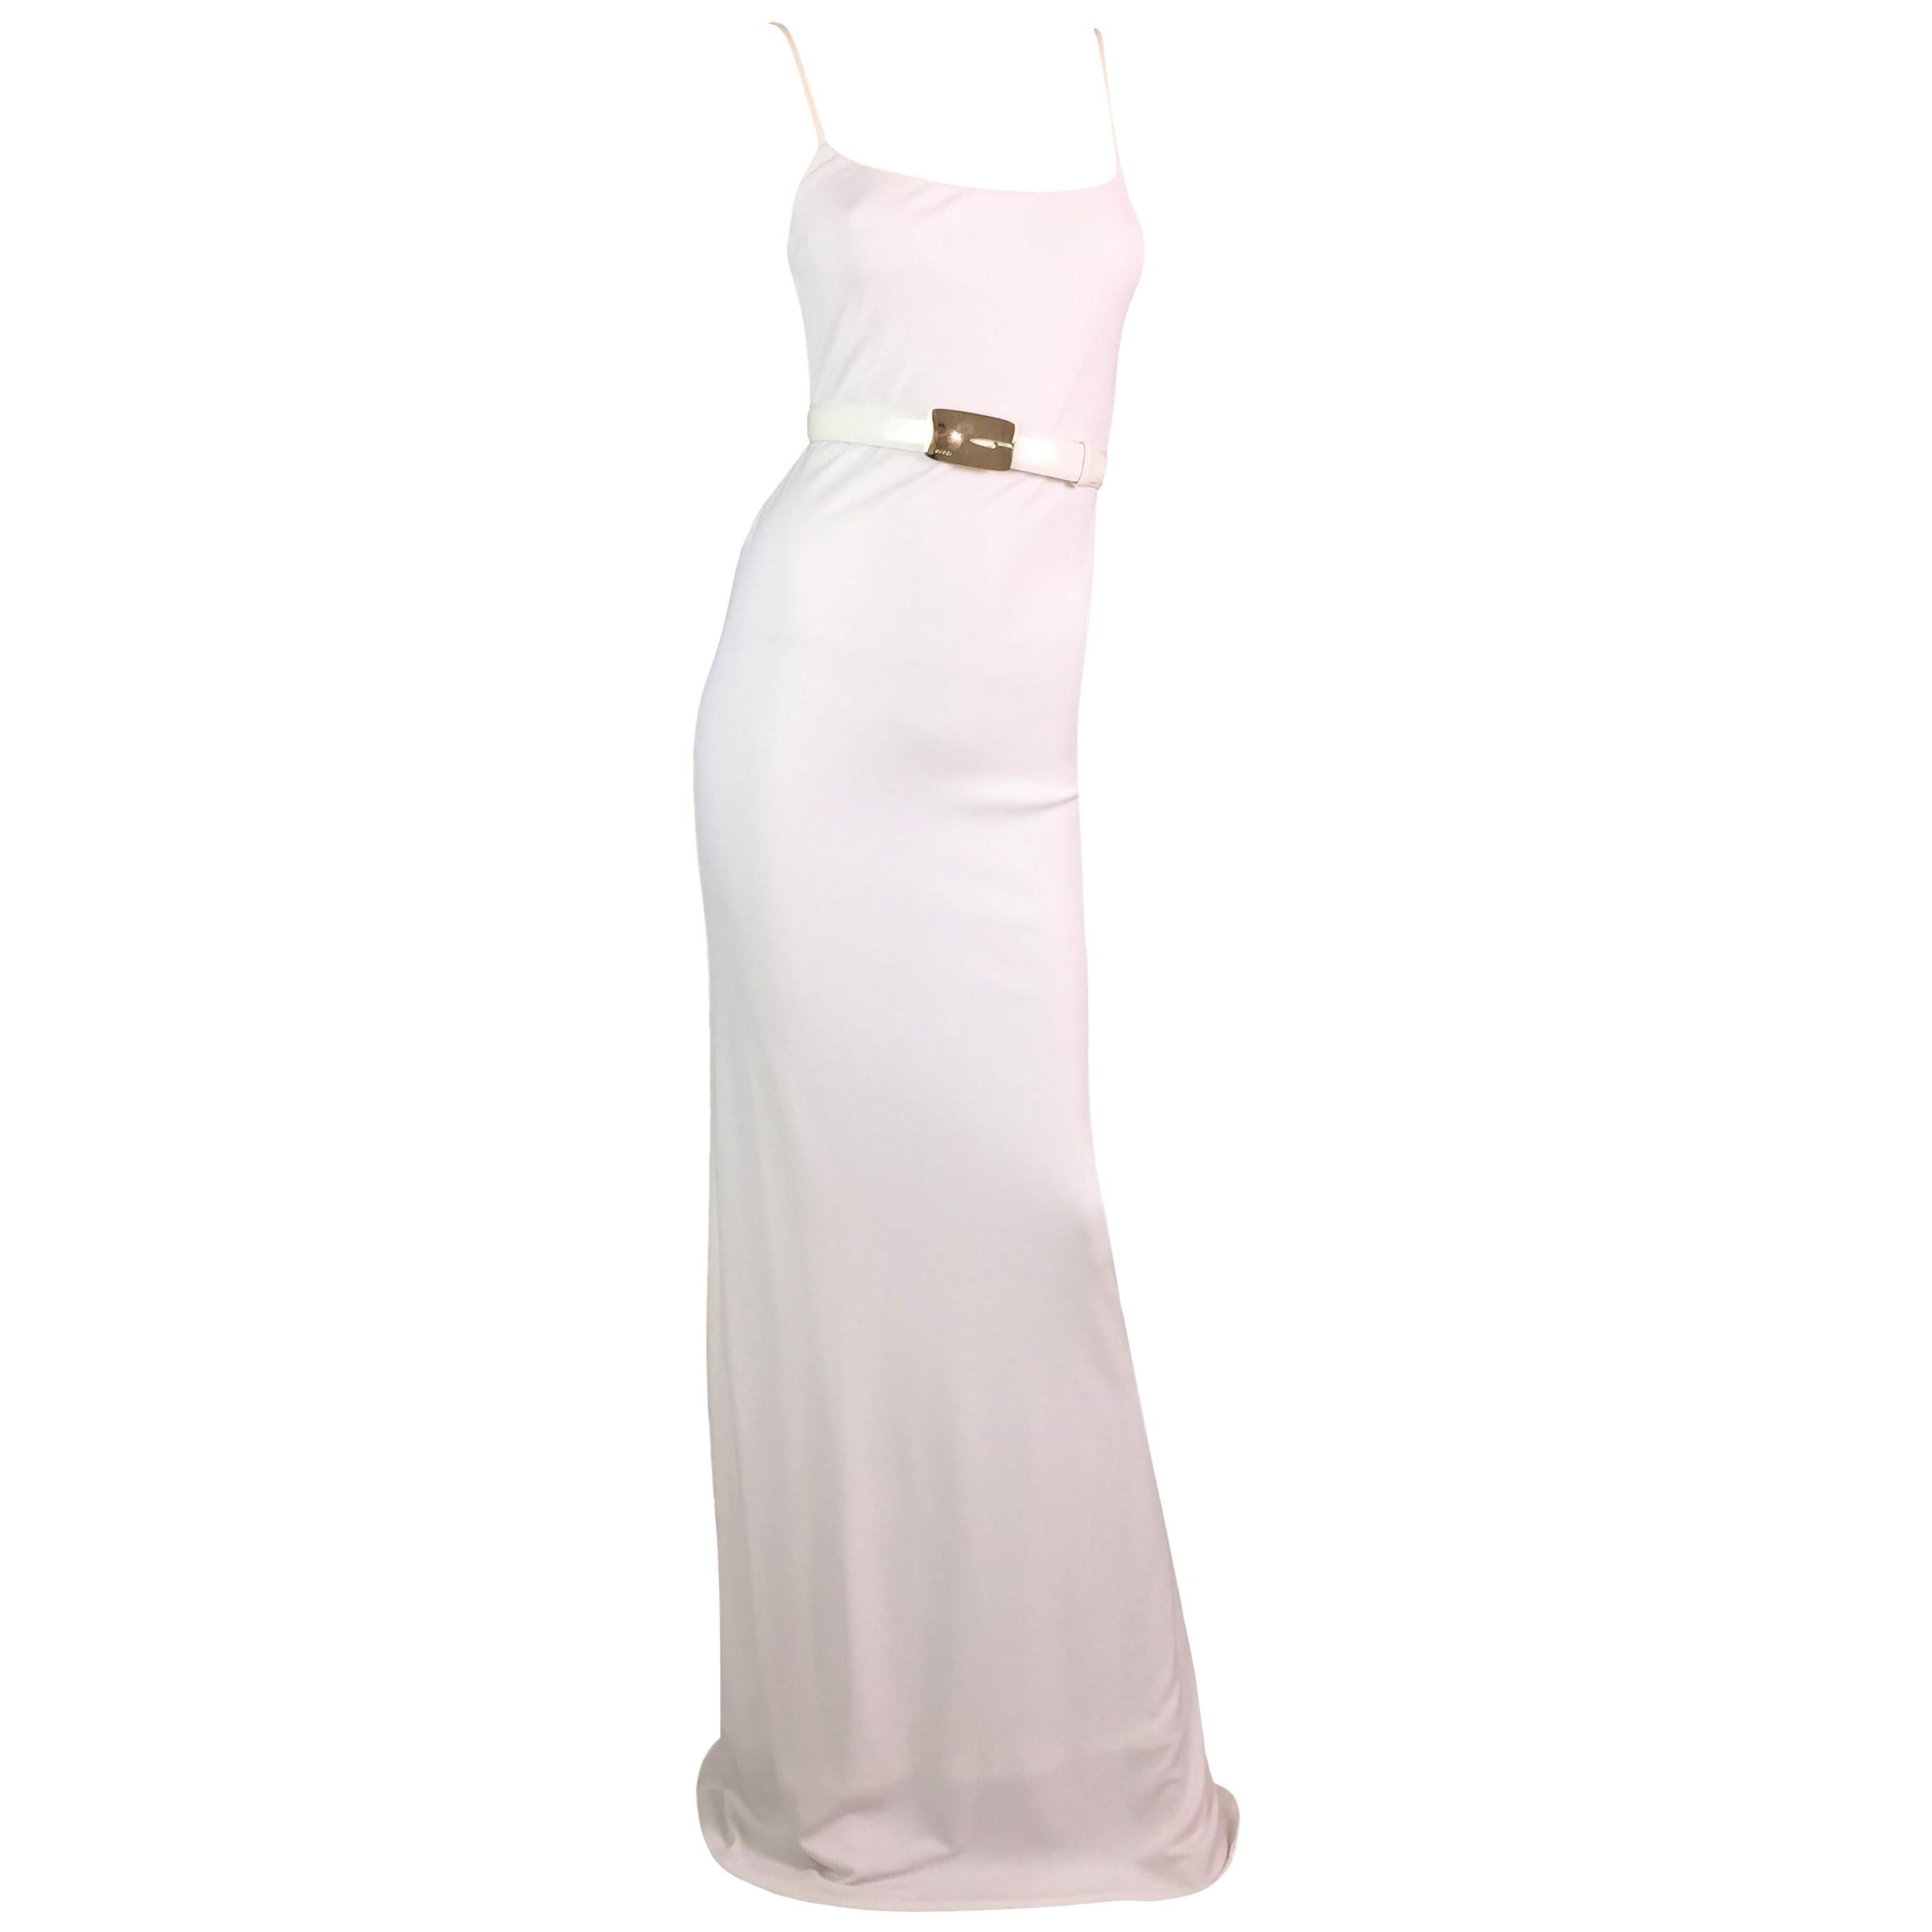 F/W 1996 Gucci Tom Ford Runway White Side Cut-Out Gown Dress